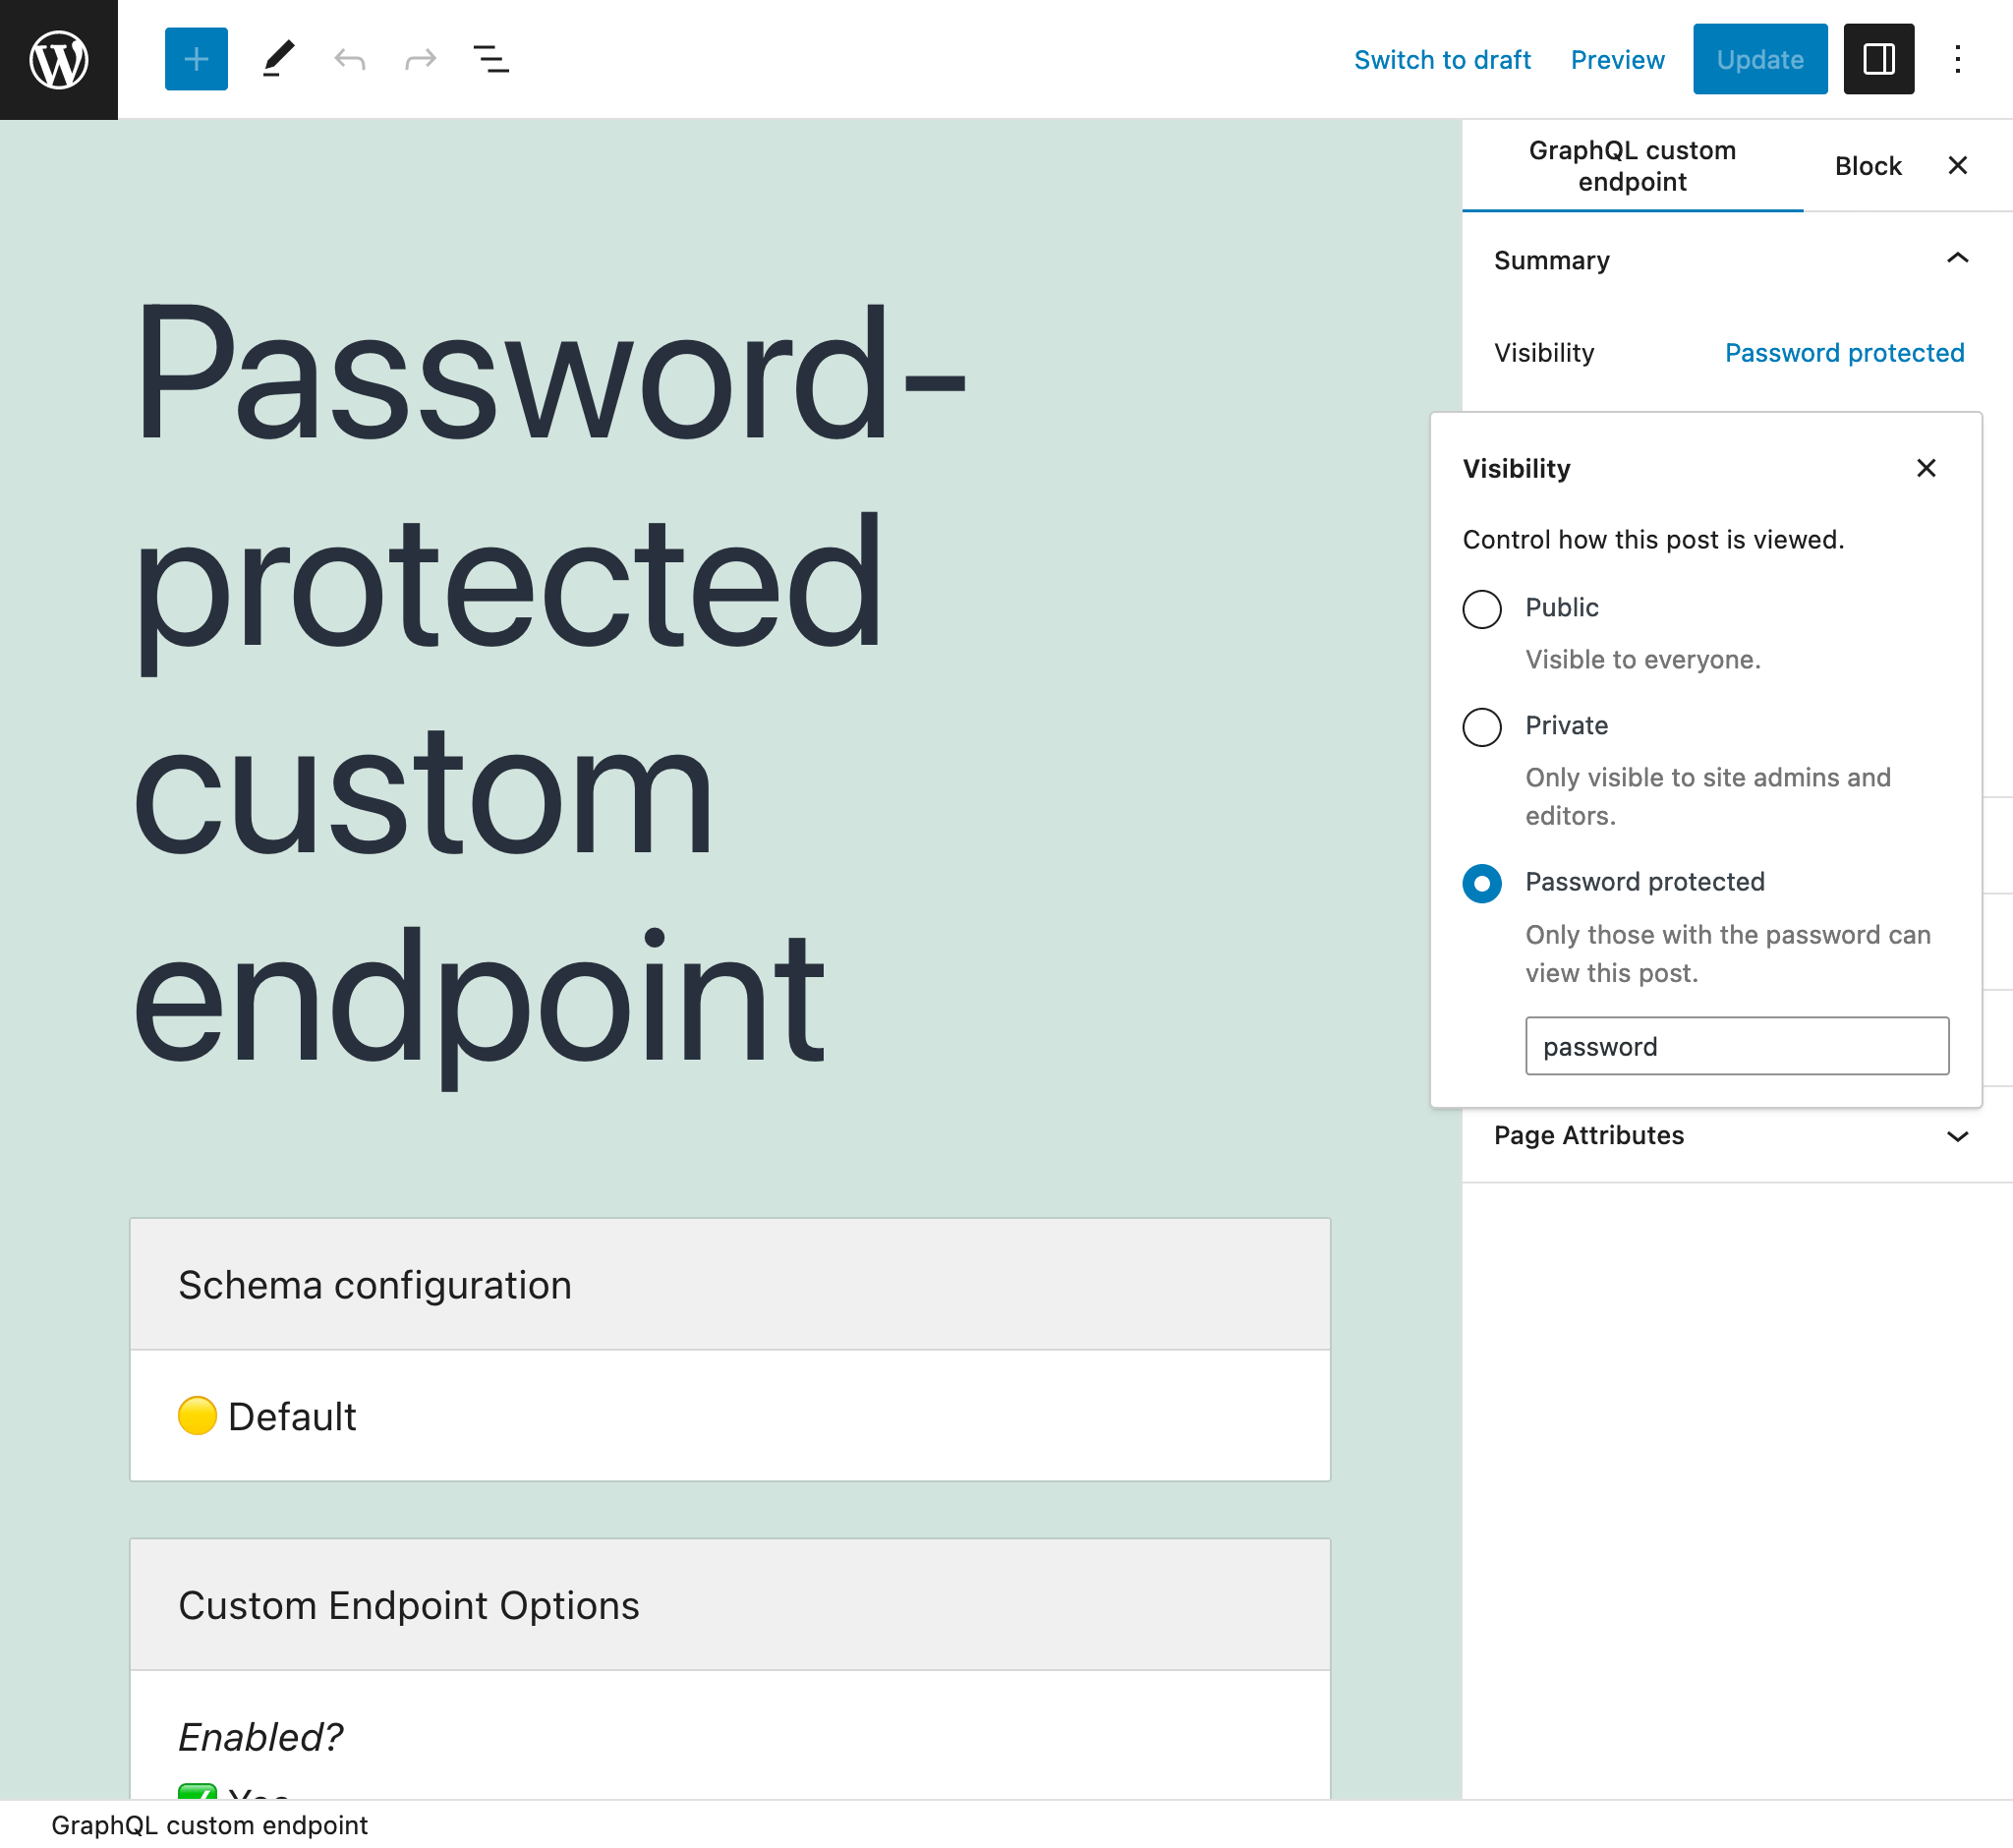 Password-protected Custom Endpoint